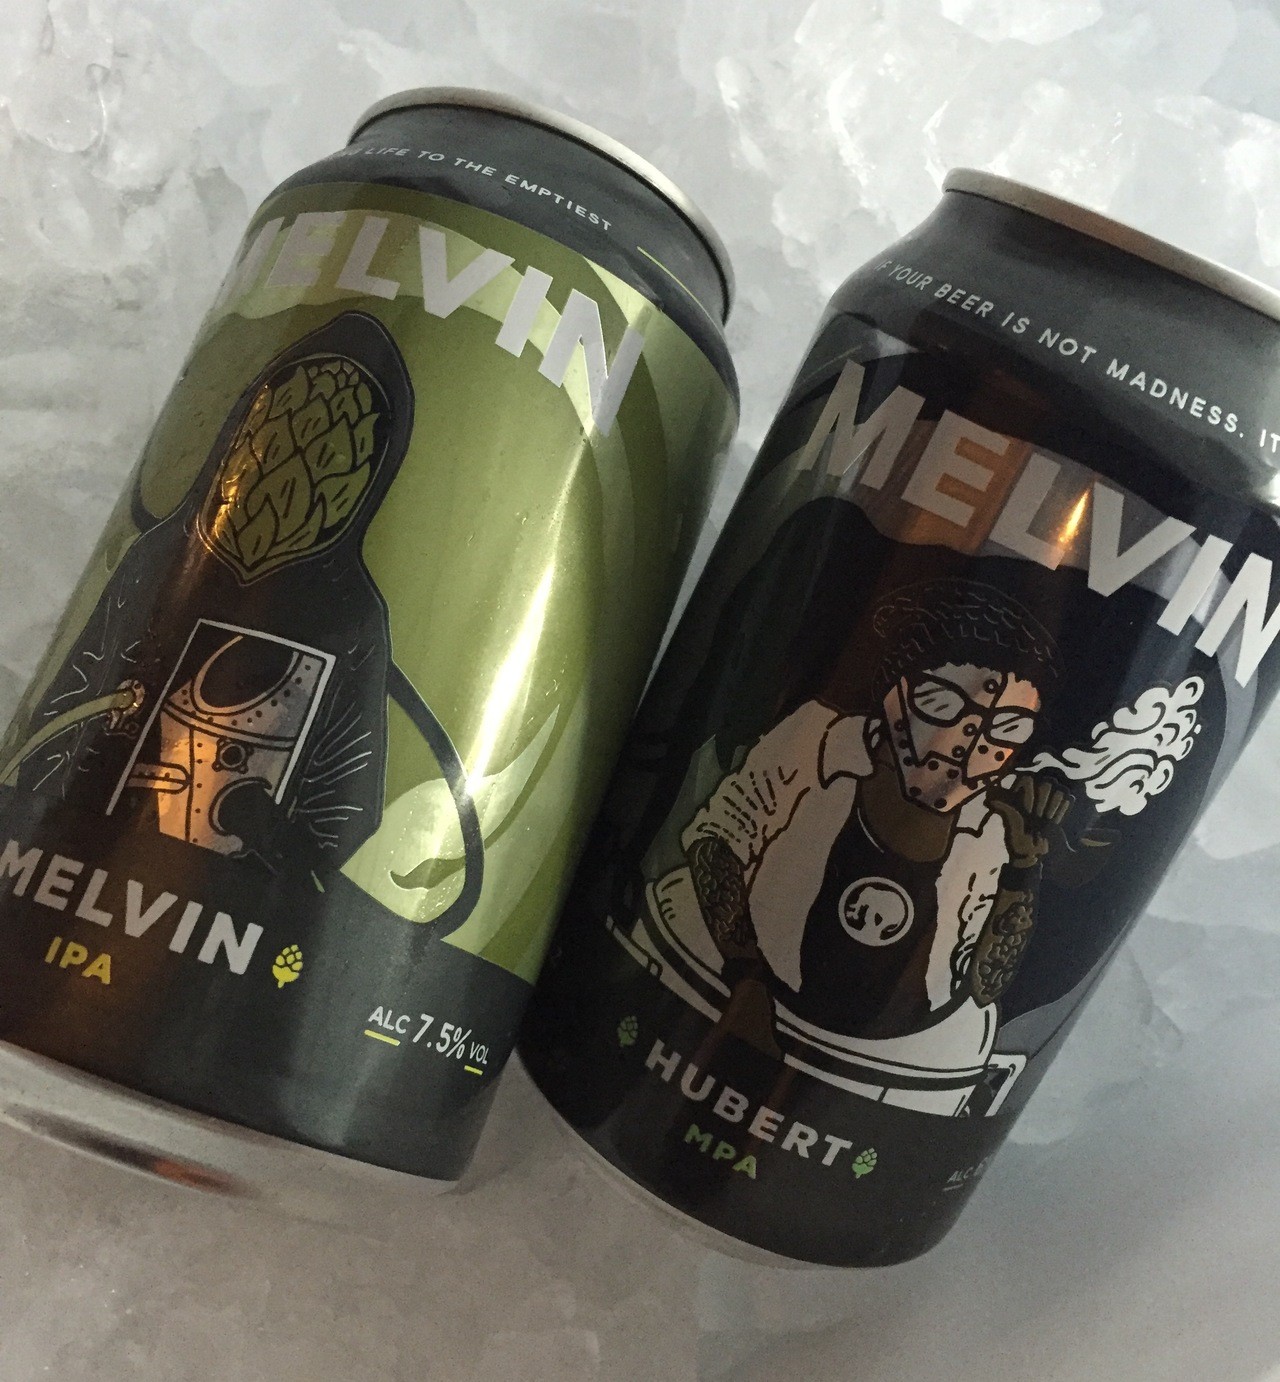 Melvin Brewing from Wyoming makes amazing beer, and the brewers are in Stanwood and Seattle for Seattle Beer Week.